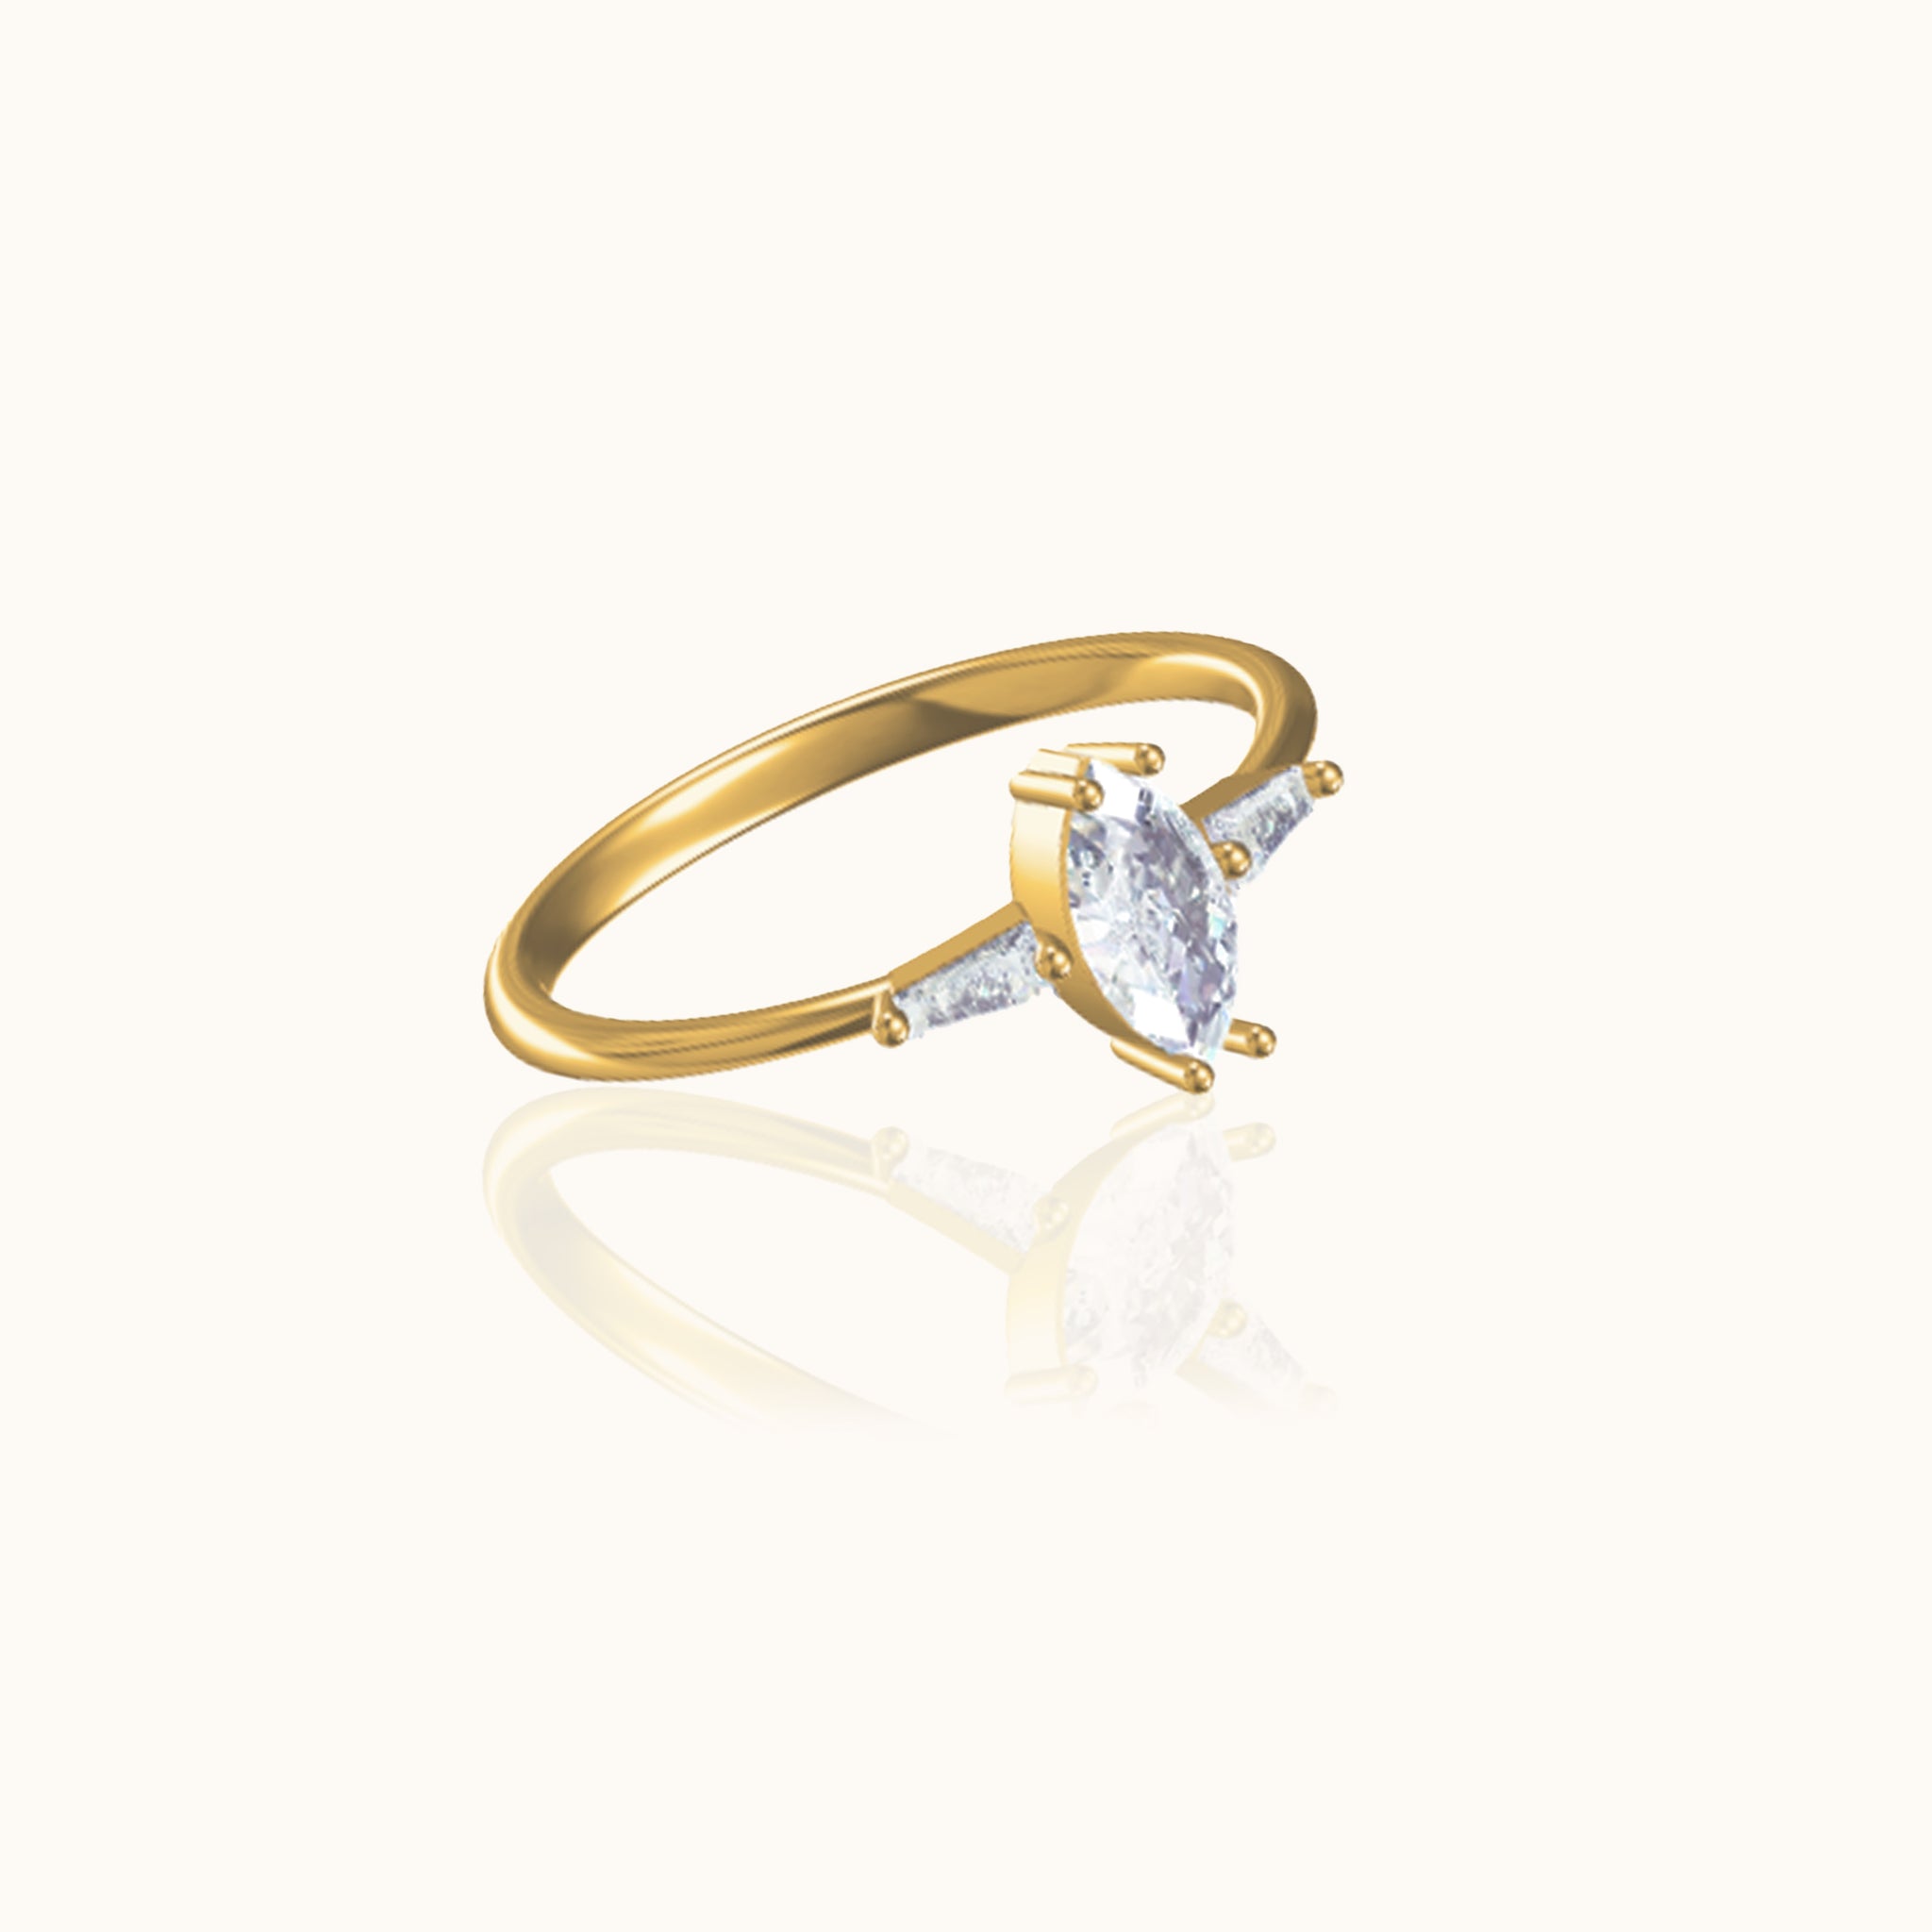 Gold Slim Band White Gem Four Prong Shiny Marquise Cut CZ Ring by Doviana